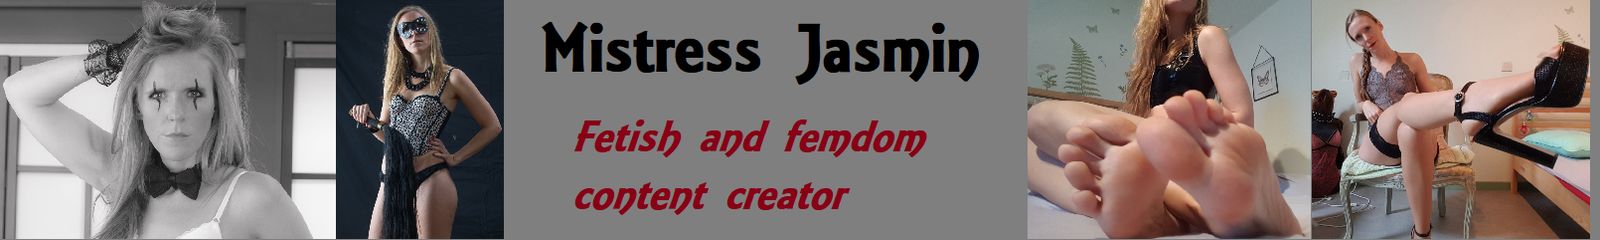 Mistress Jasmin and her submissives